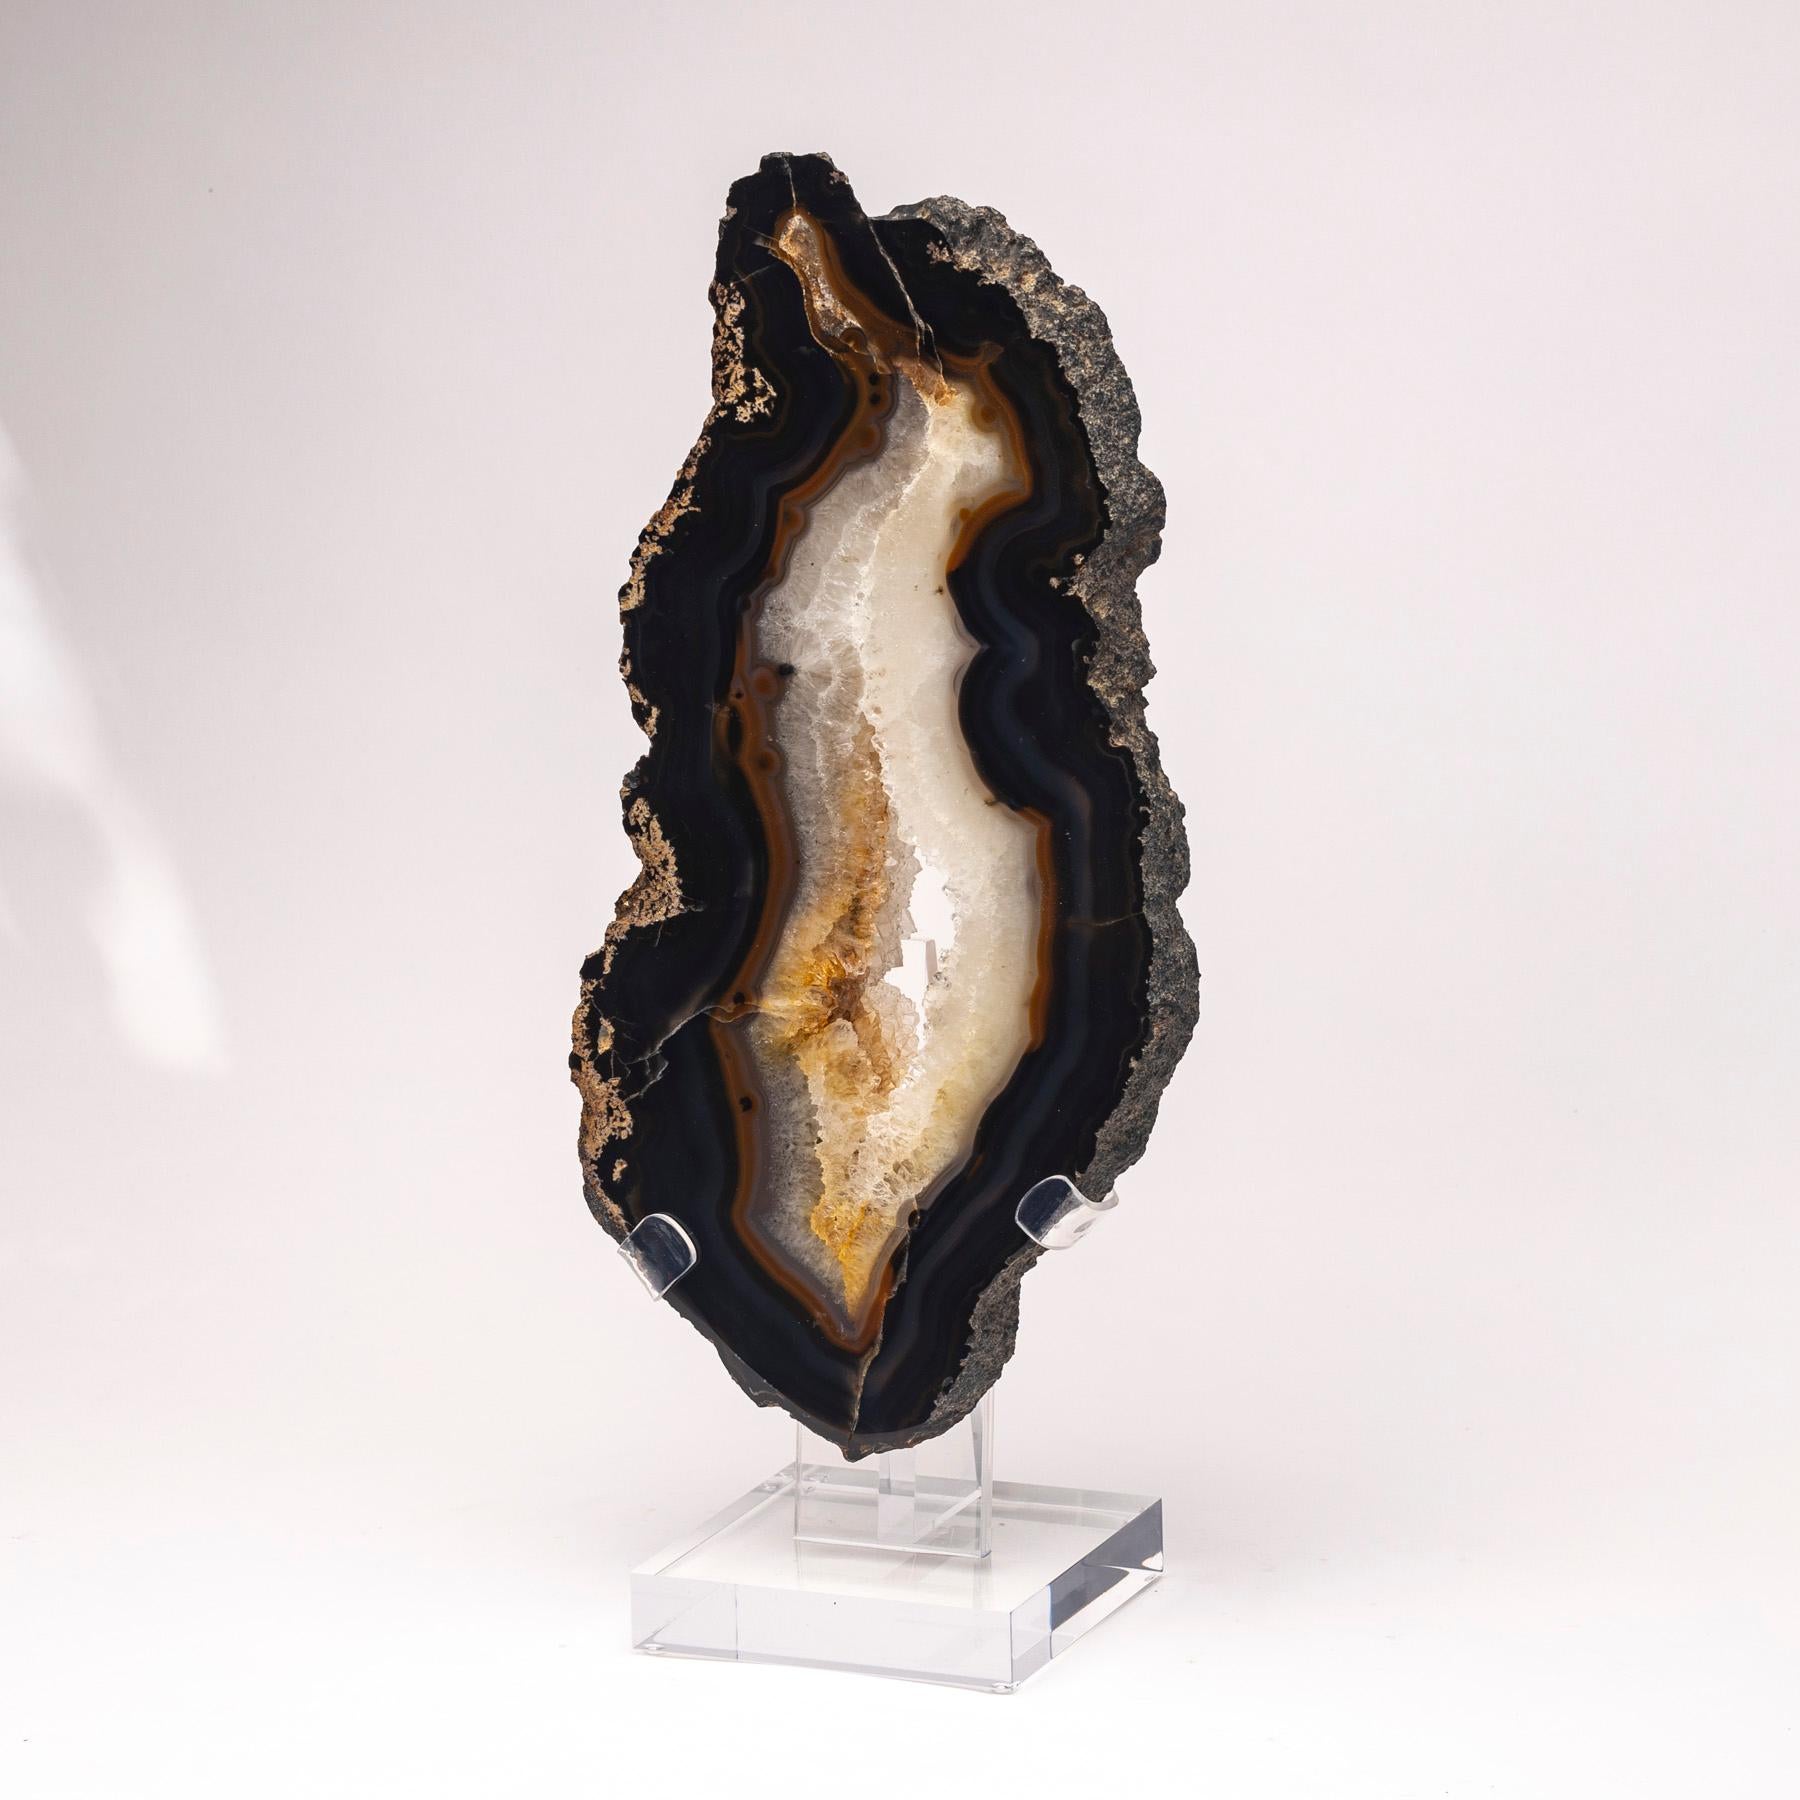 Top grade agate slab from Brazil.
Agates are formed in rounded nodules, which are sliced open to bring out the internal pattern hidden in the stone. Their formation is commonly from depositions of layers of silica filling voids in volcanic vesicles